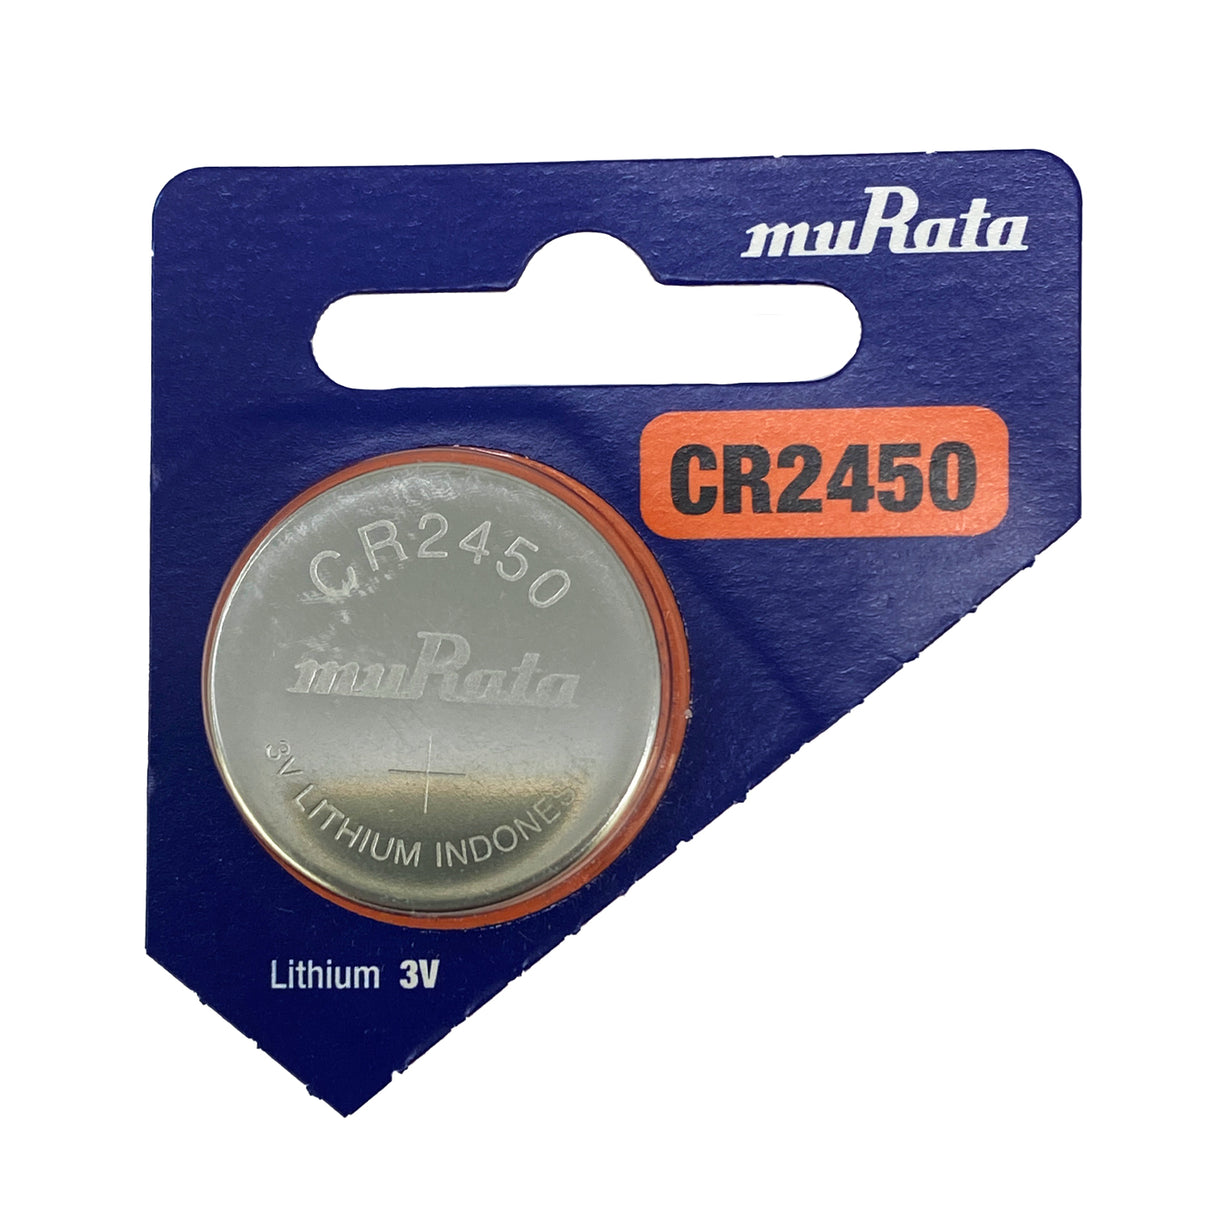 CR2450 Coin Cell Lithium Ion 3V Battery